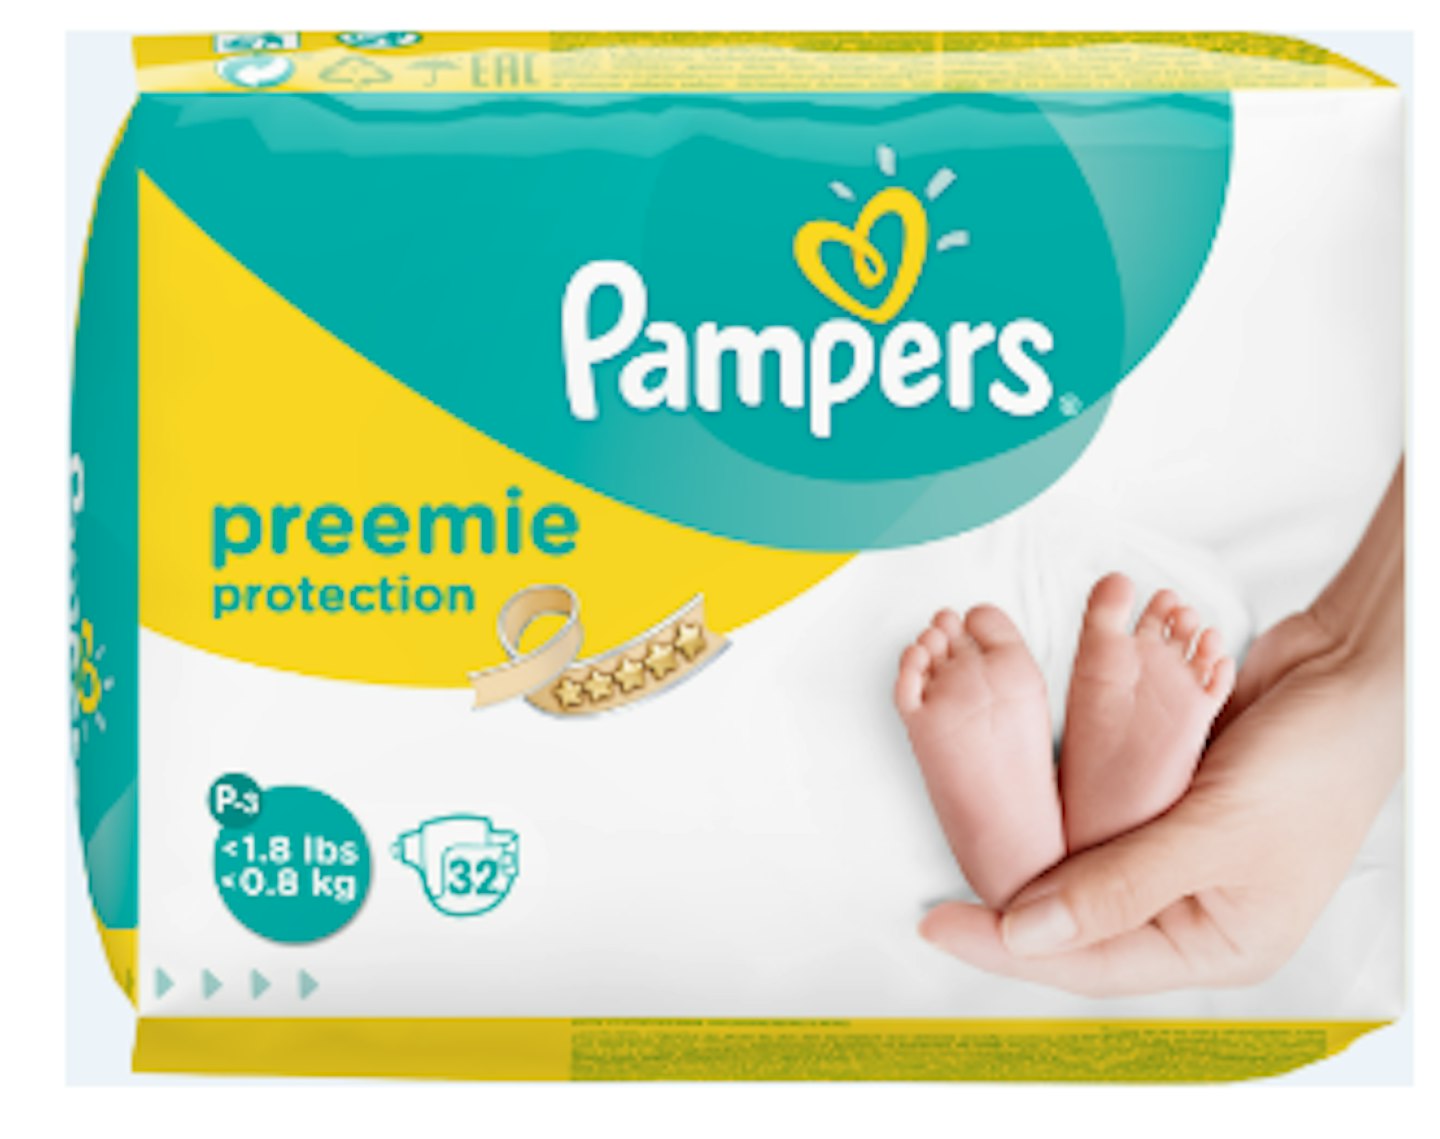 Pampers Preemie Protection Nappies